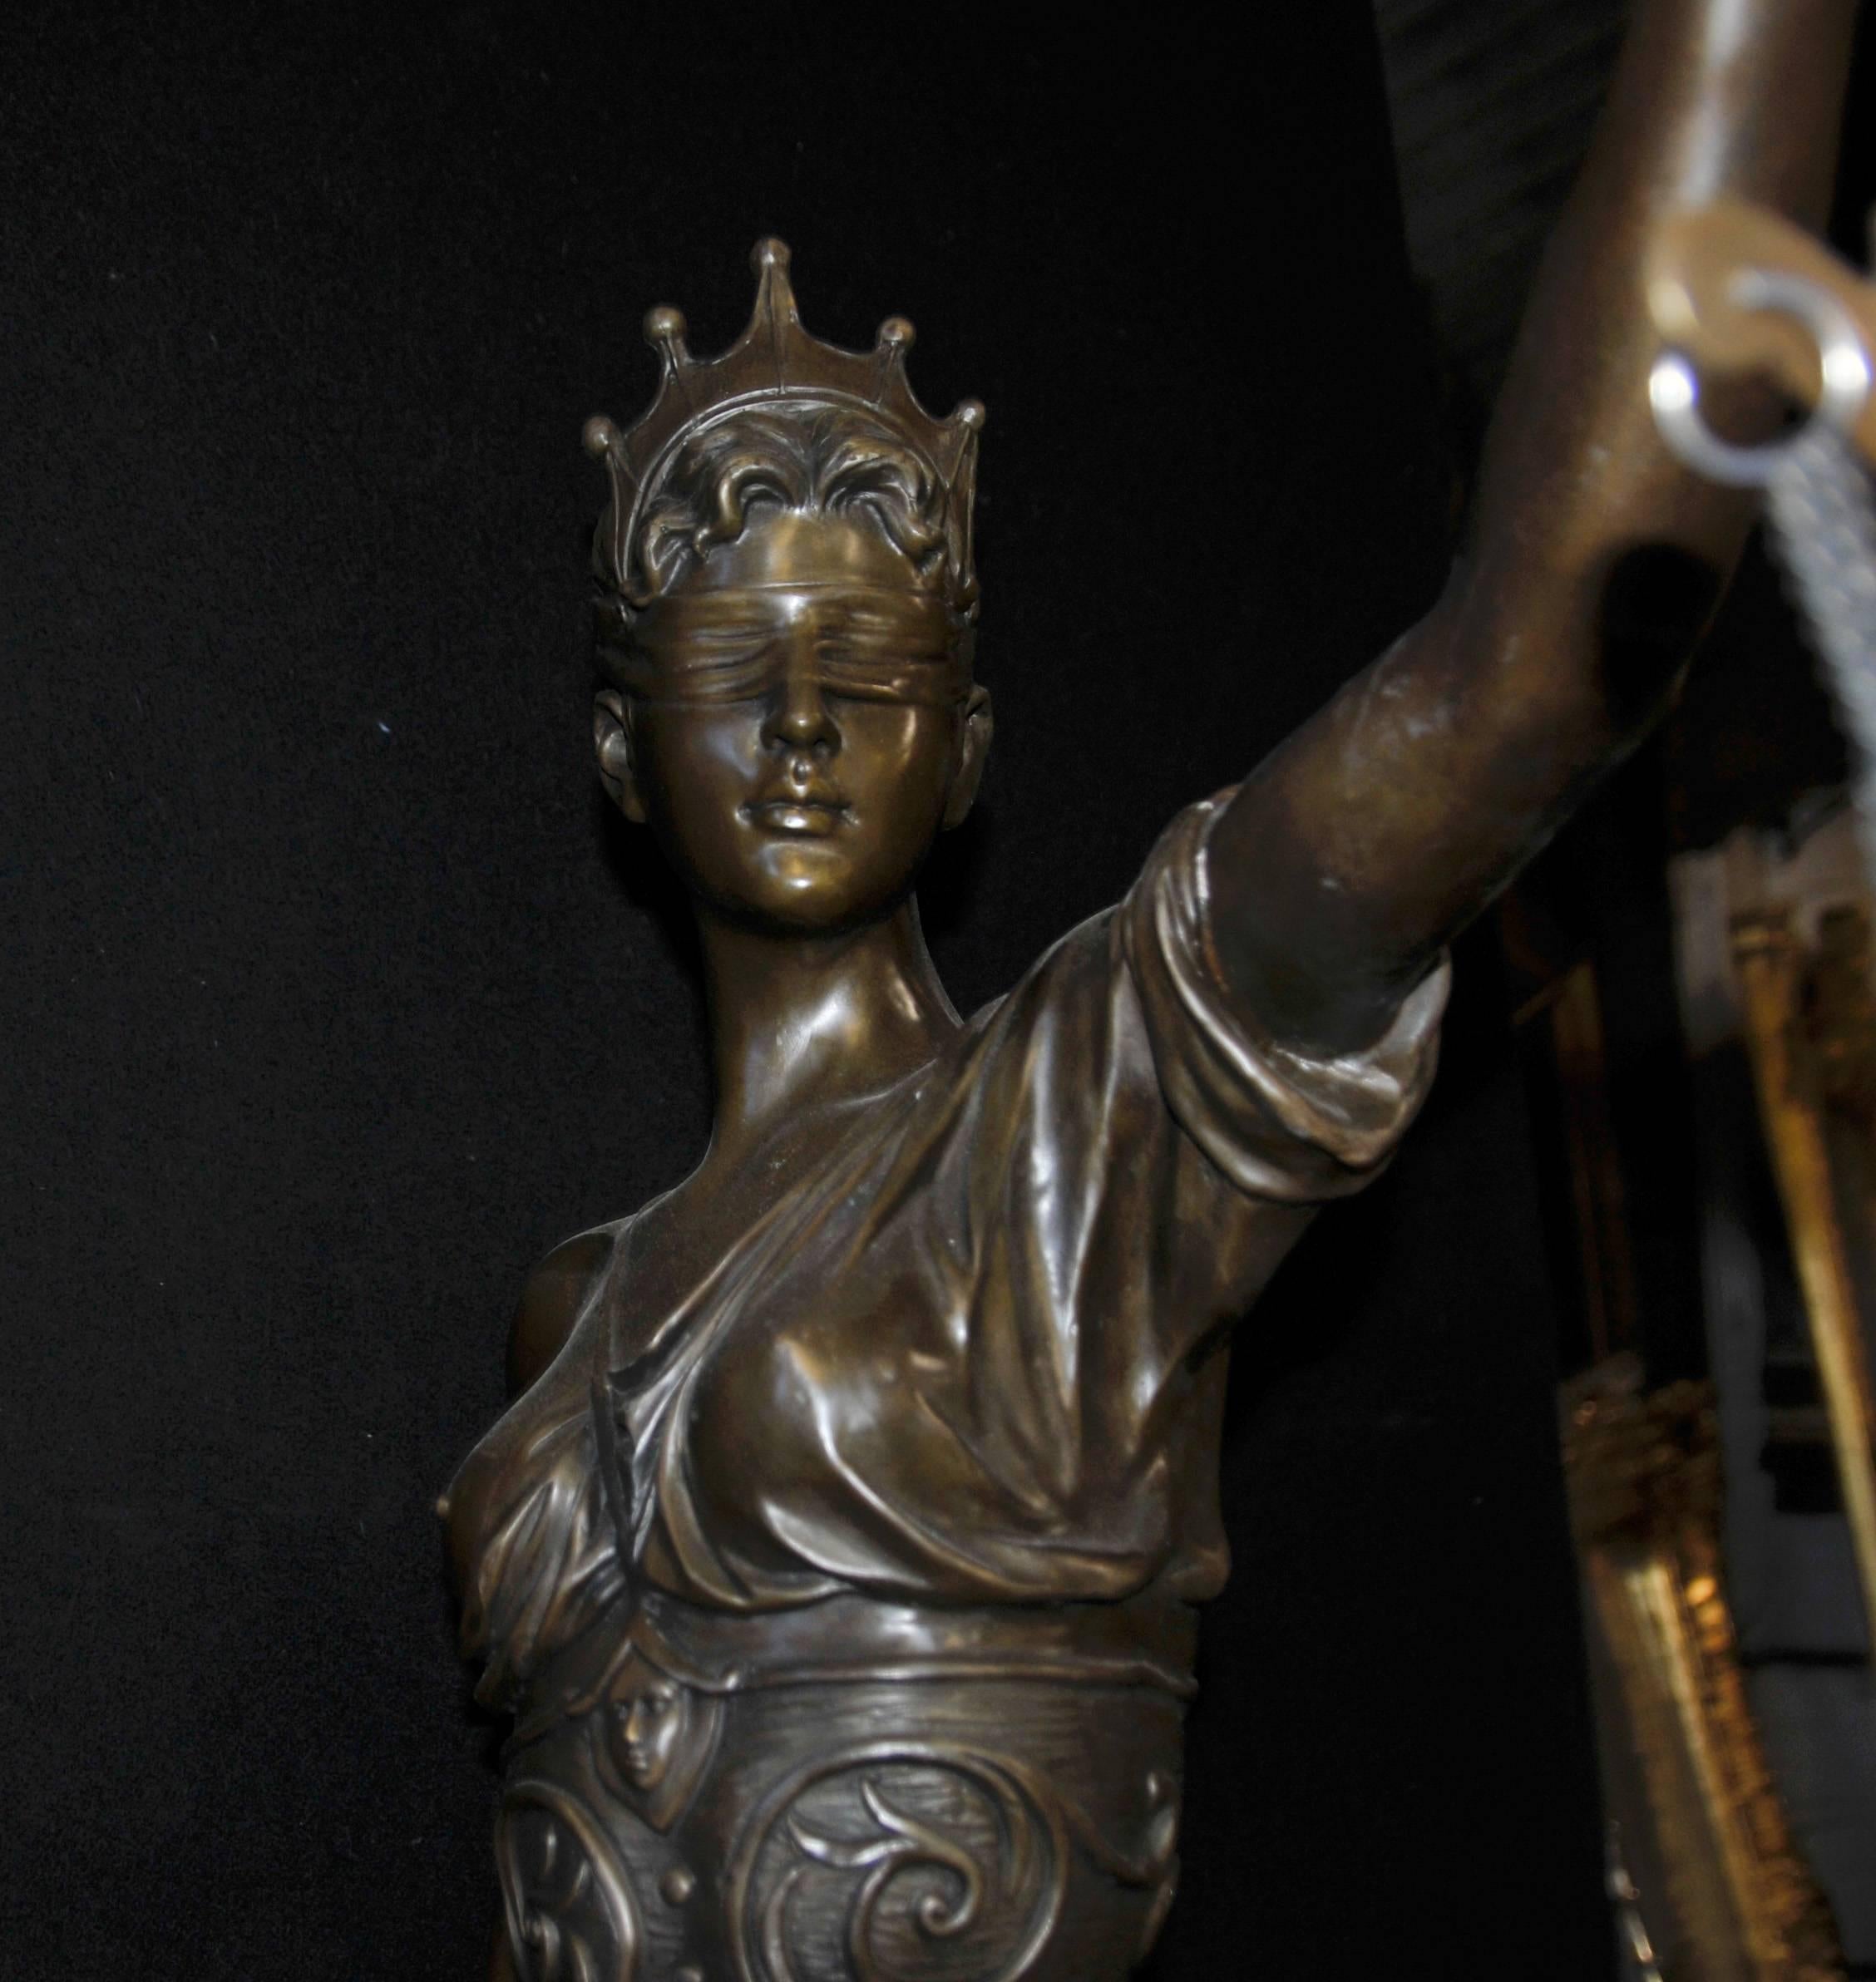 Large French bronze casting of the Classic Lady Justice on a marble base, stands over 6 feet tall so important size to this architectural piece - Patina to the bronze is fantastic, with lovely dark hue - Casting is so well executed from a French